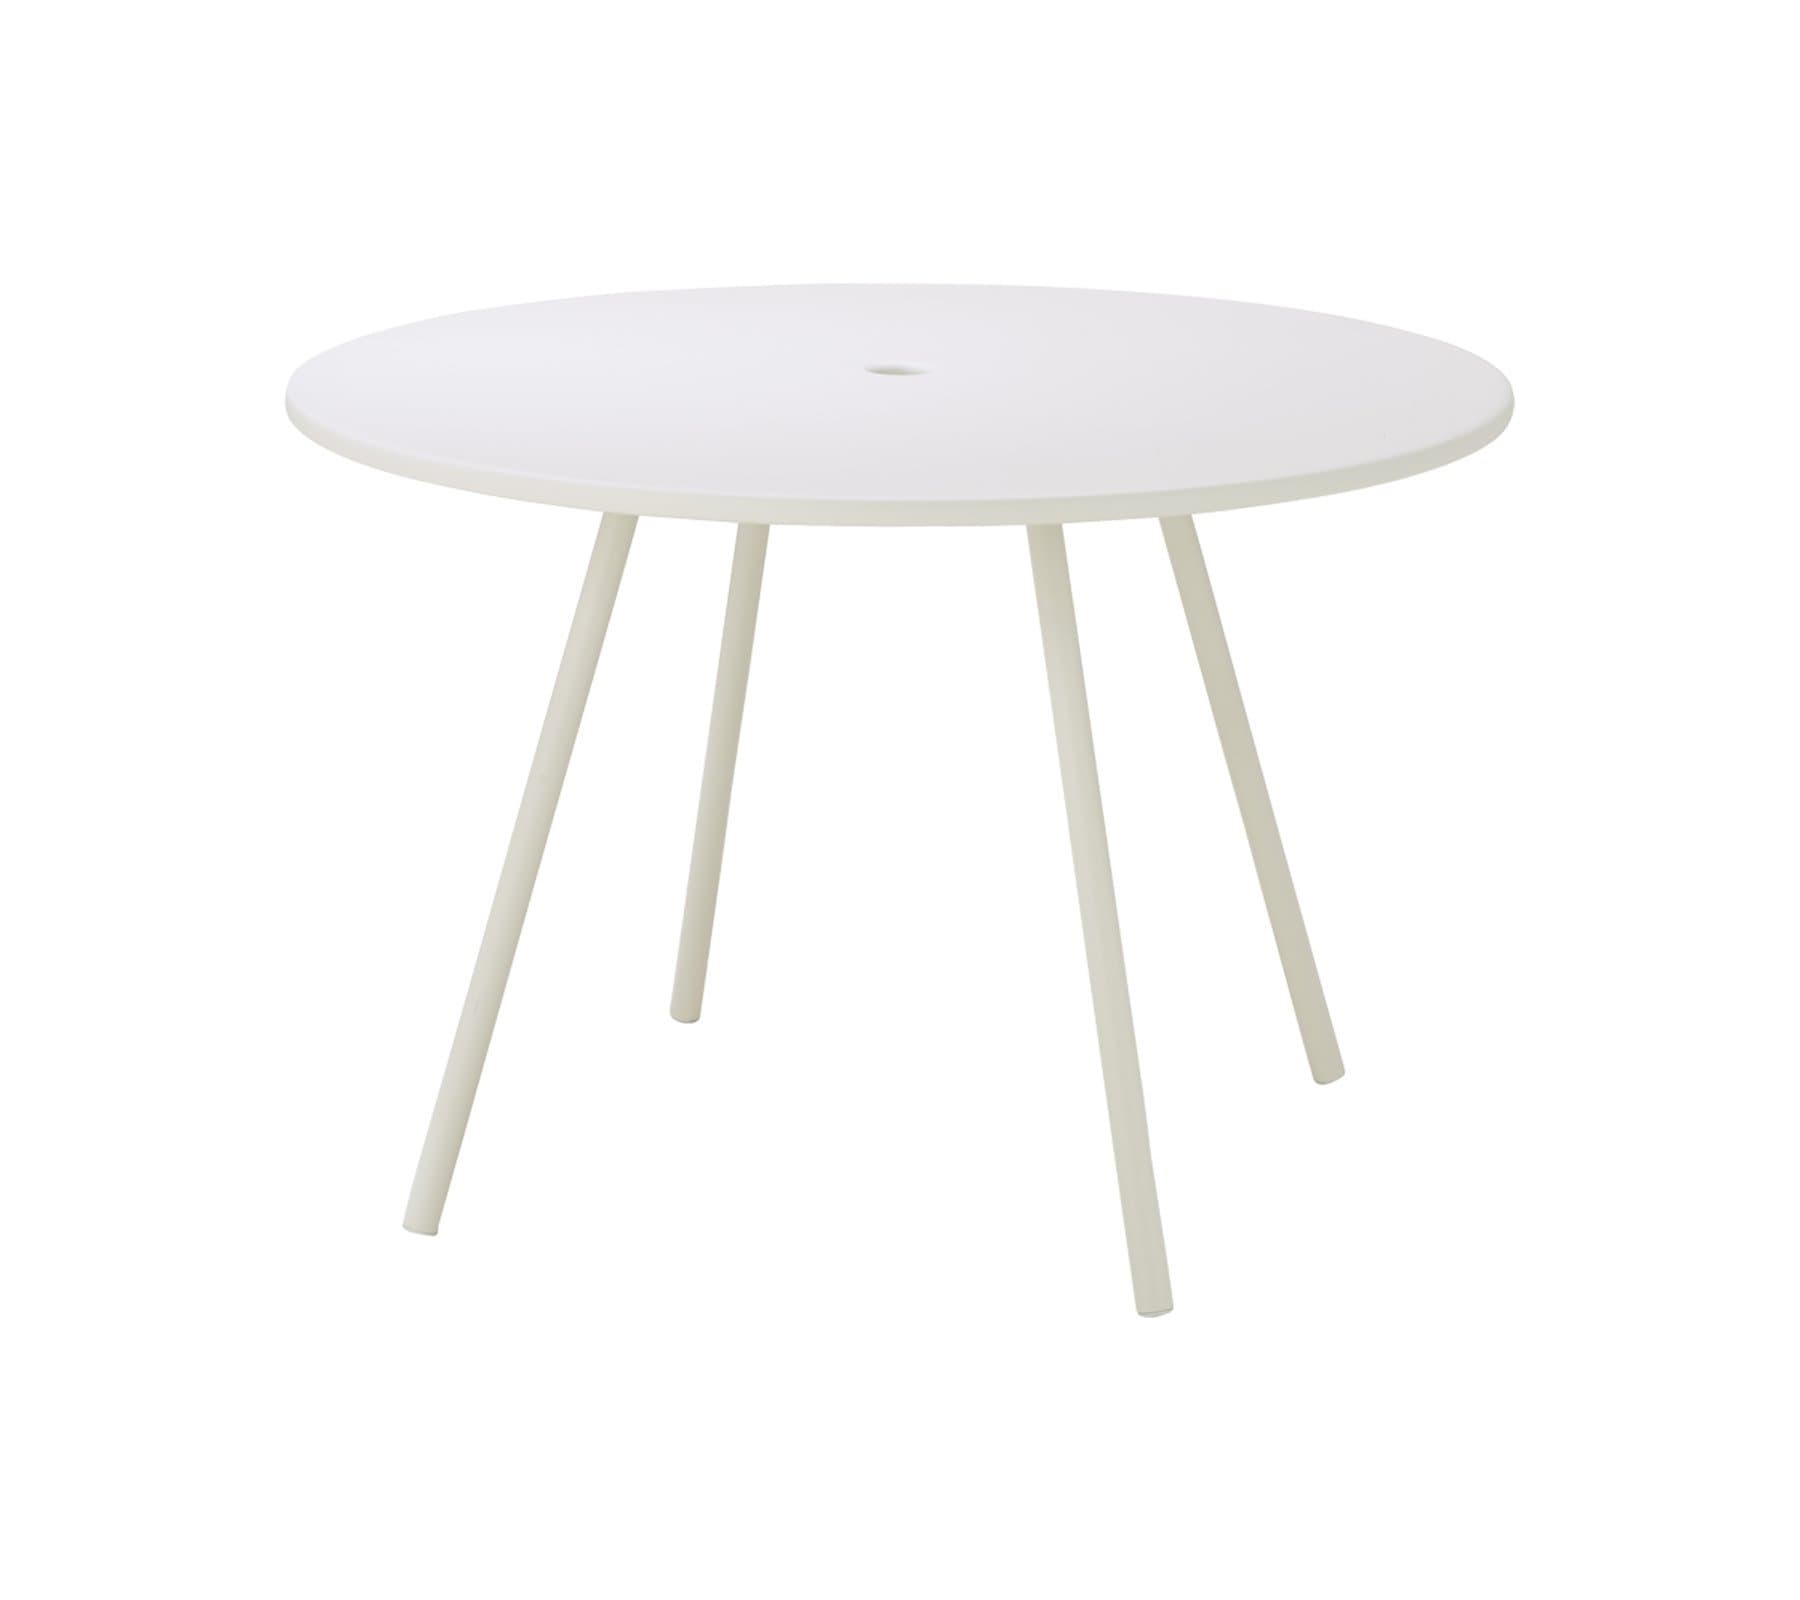 Cane-Line Denmark Outdoor Dining Table White Copy of Cane-Line Area table | 11010AW-19